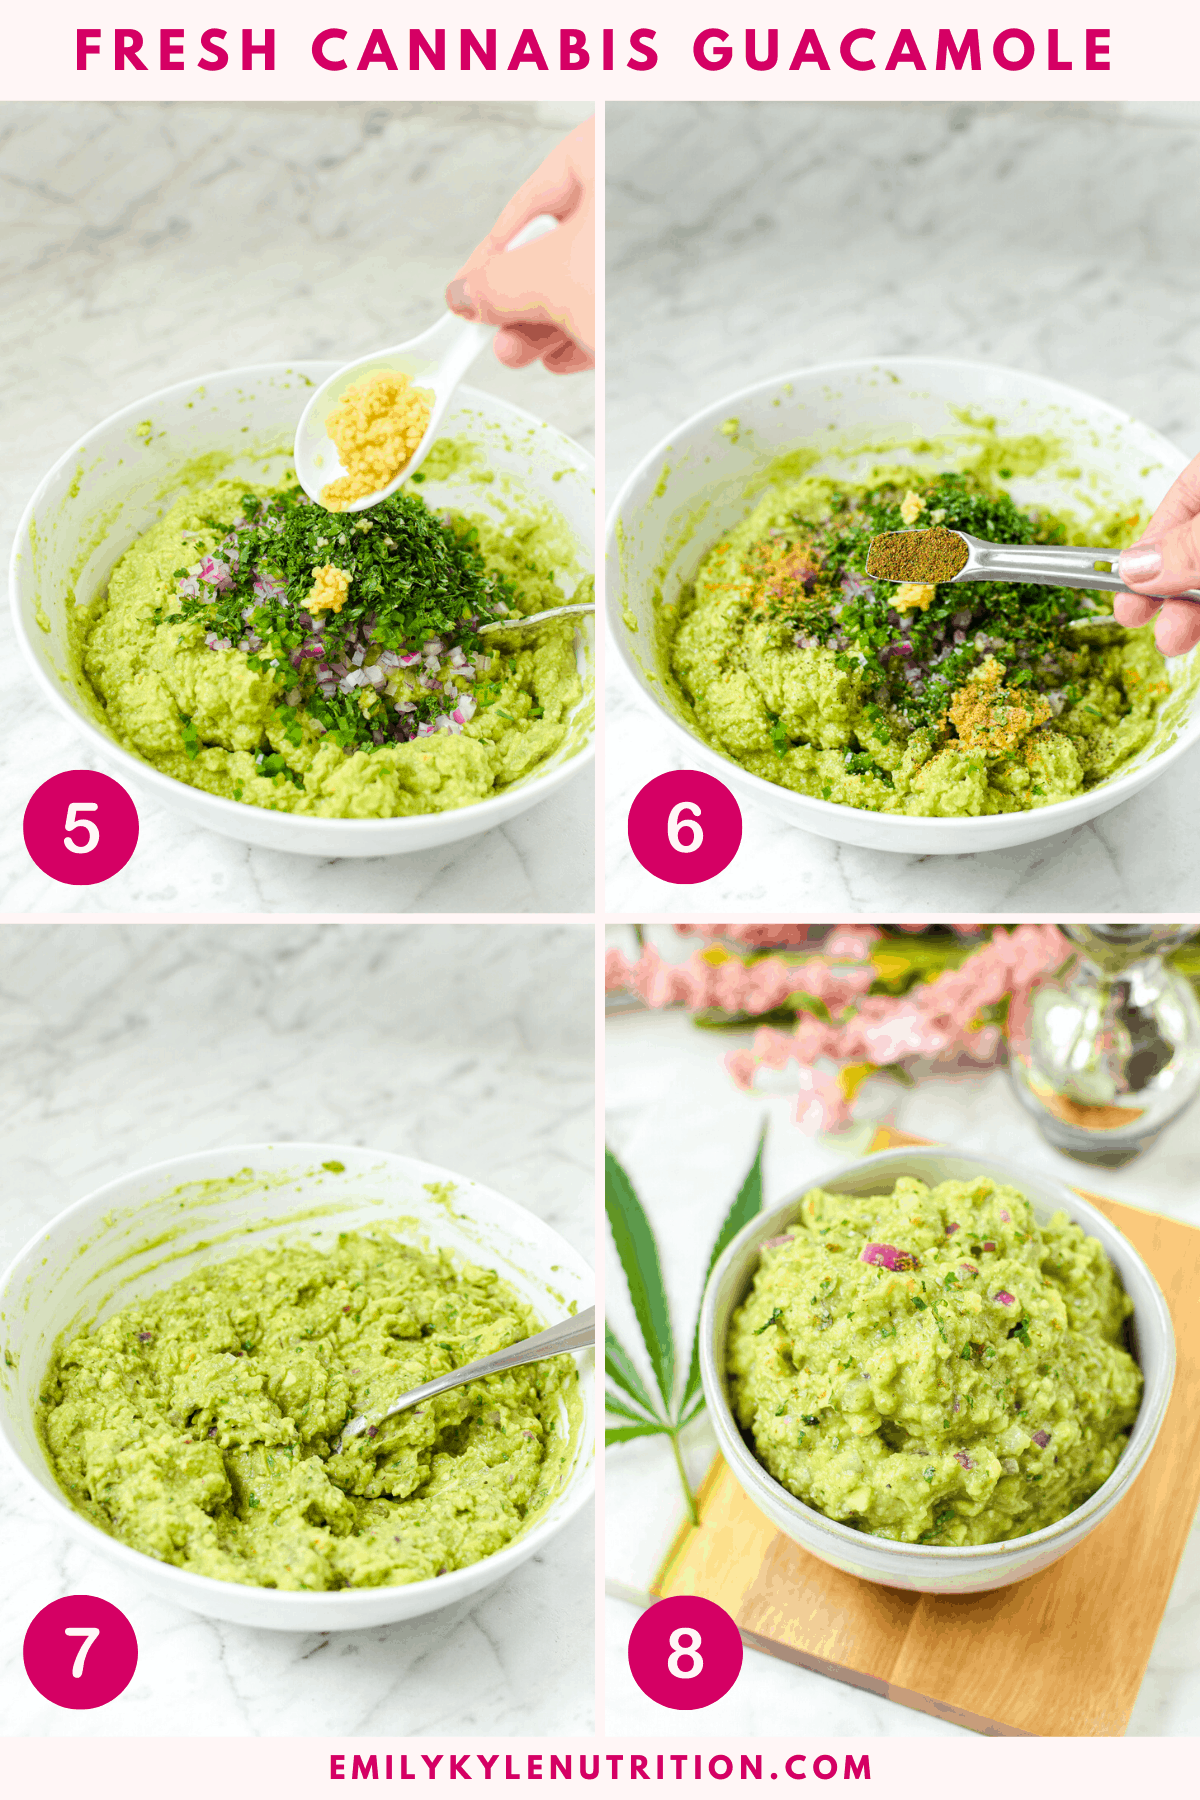 Four images in a collage put together to show you how to make cannabis infused guacamole